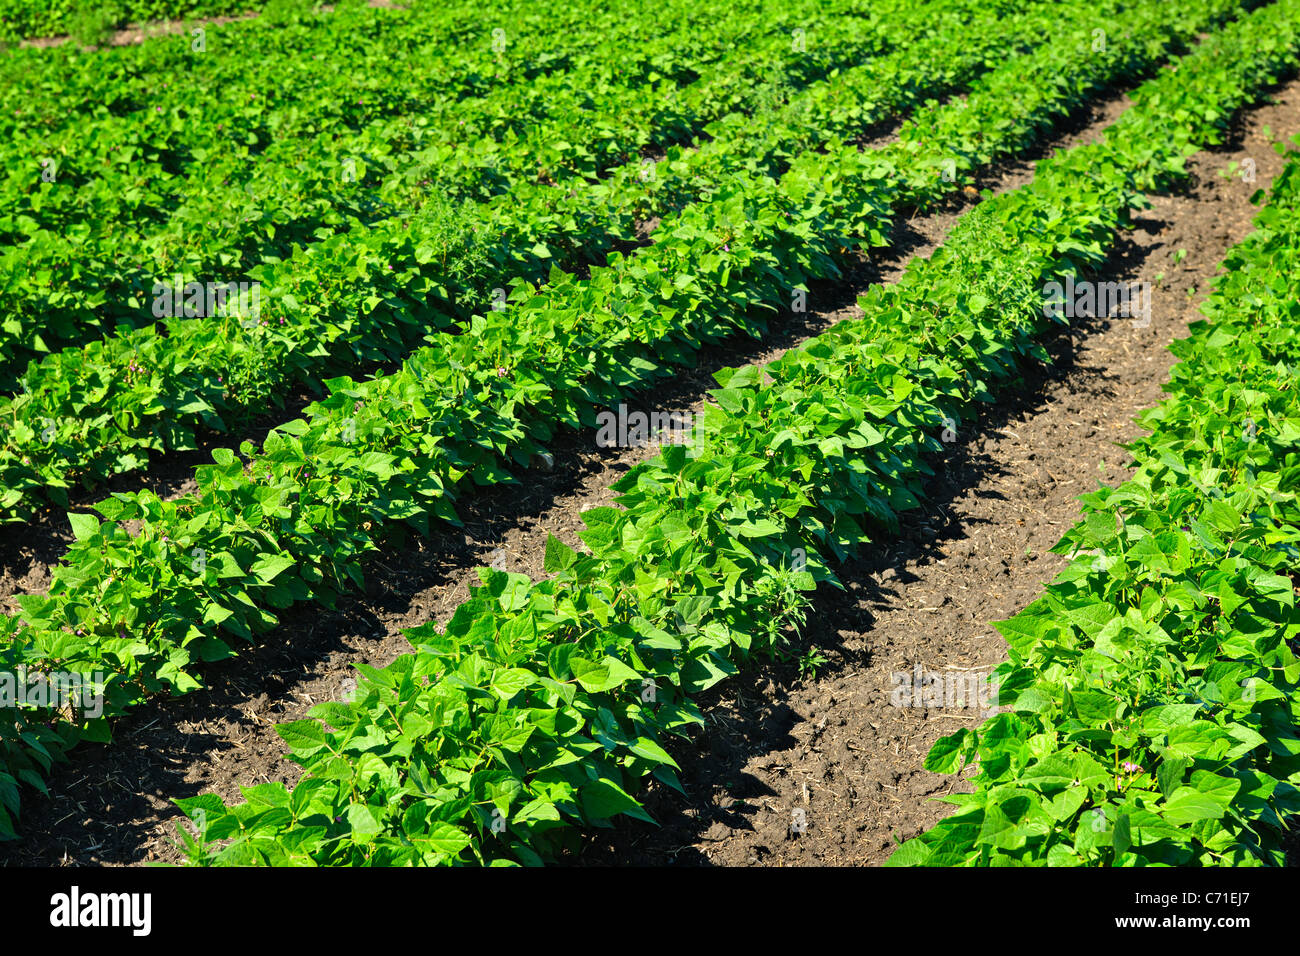 Rows of soy plants in a cultivated farmers field Stock Photo